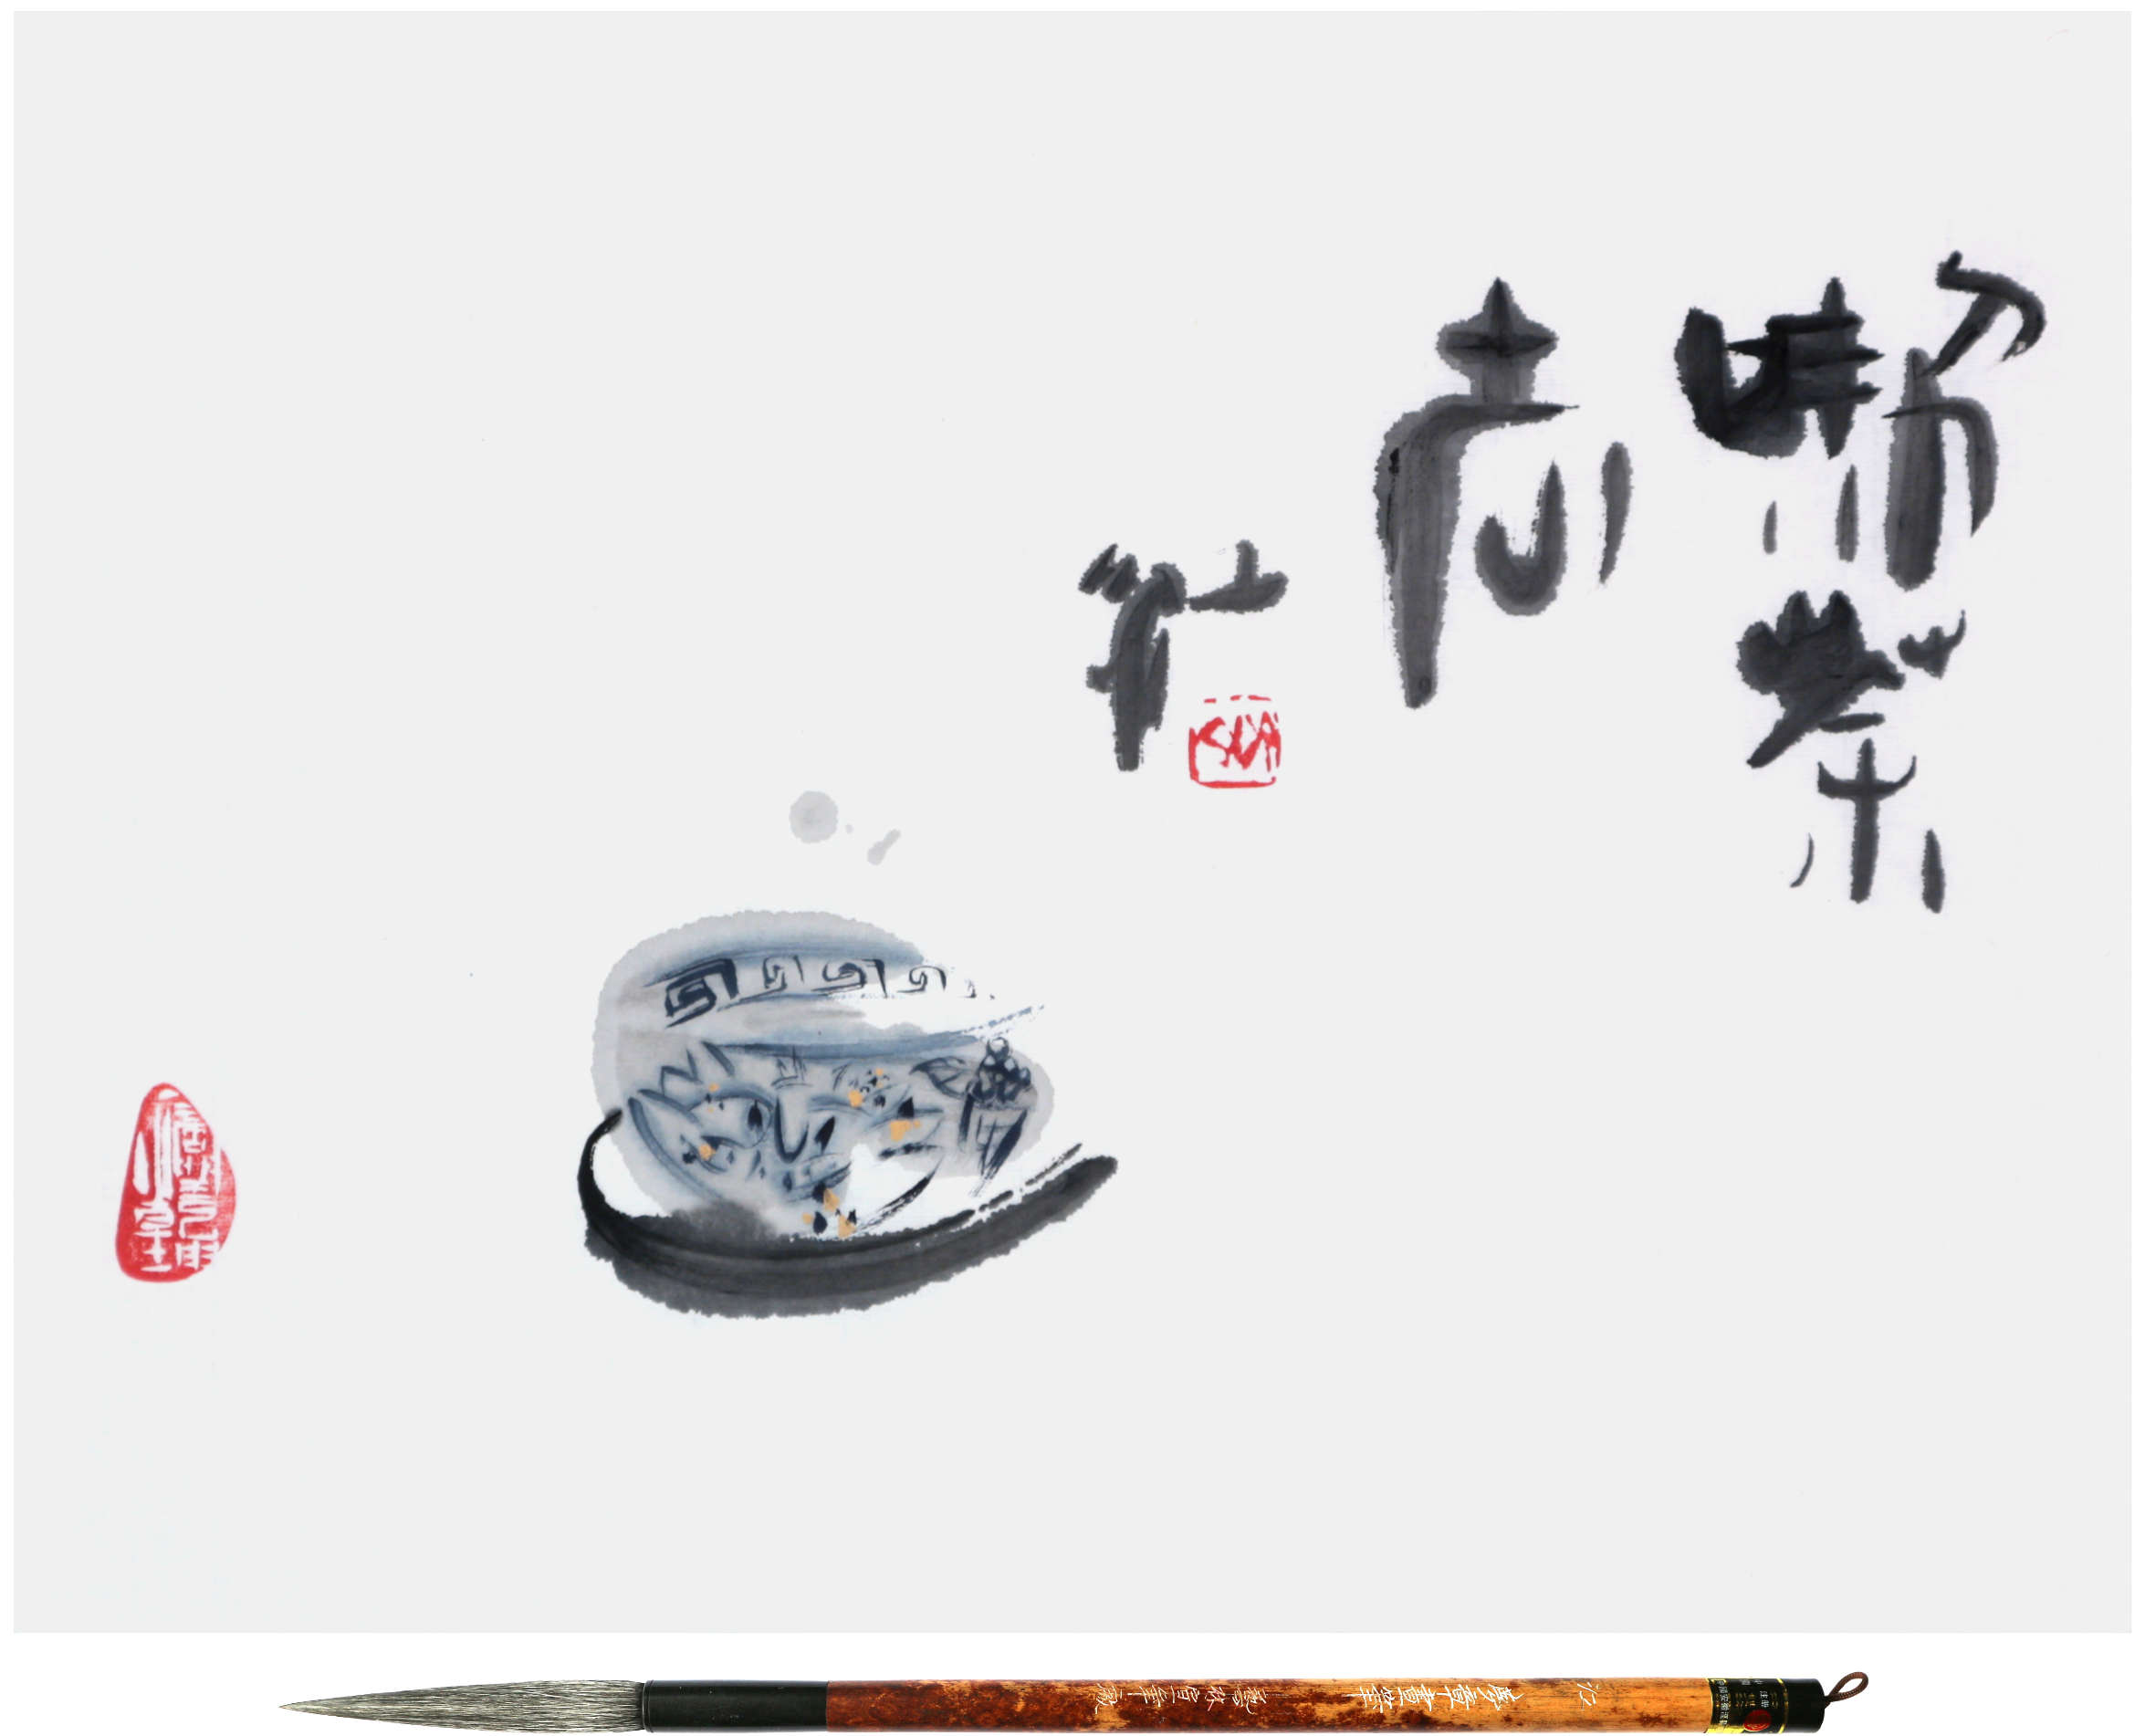 Sai Koh (Qi Hong)’s Freehand Brushwork Traditional Chinese Painting and Calligraphy on Tea: Chinese painting (still life painting, literati painting, ink wash painting), Chinese calligraphy (semi-seal script calligraphy), Chinese seal engraving (Chinese seal carving, Chinese seal cutting) - A Cup of Tea - 